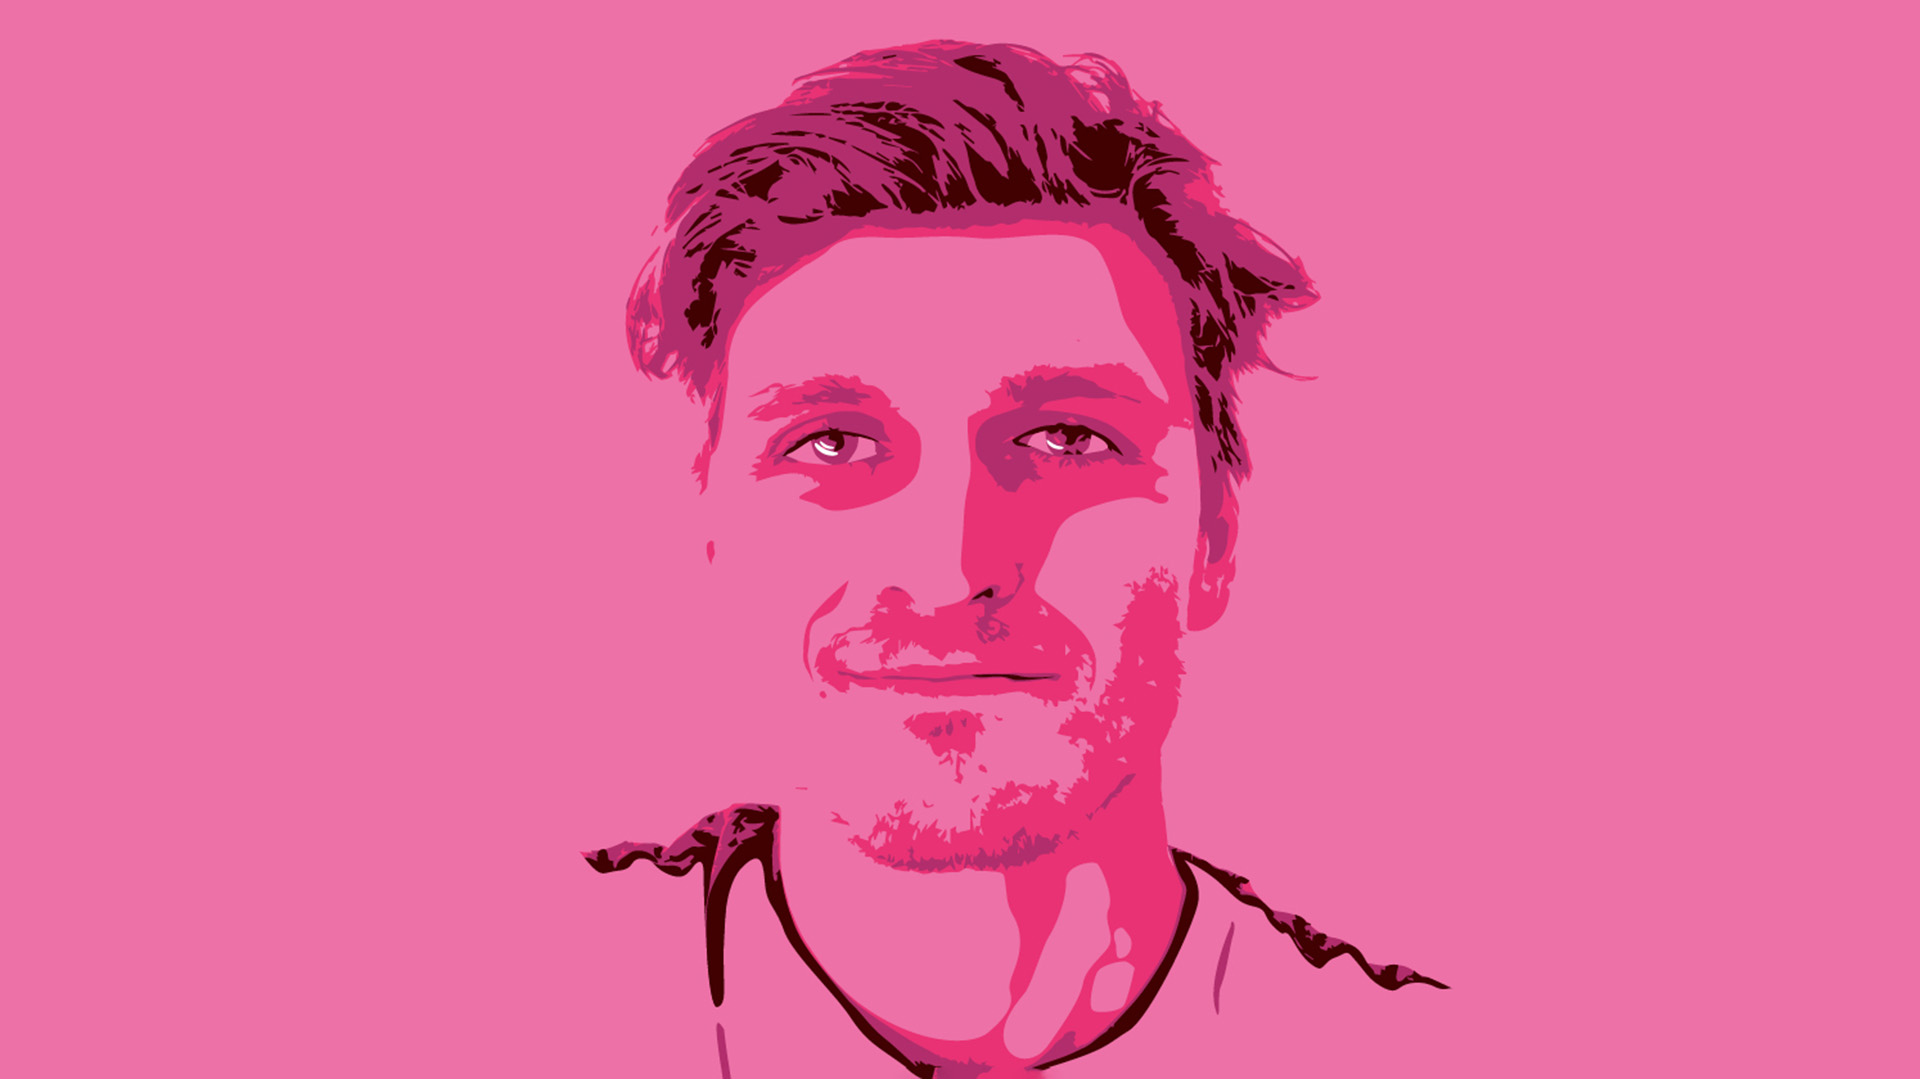 Jacob Ridley headshot with pink background